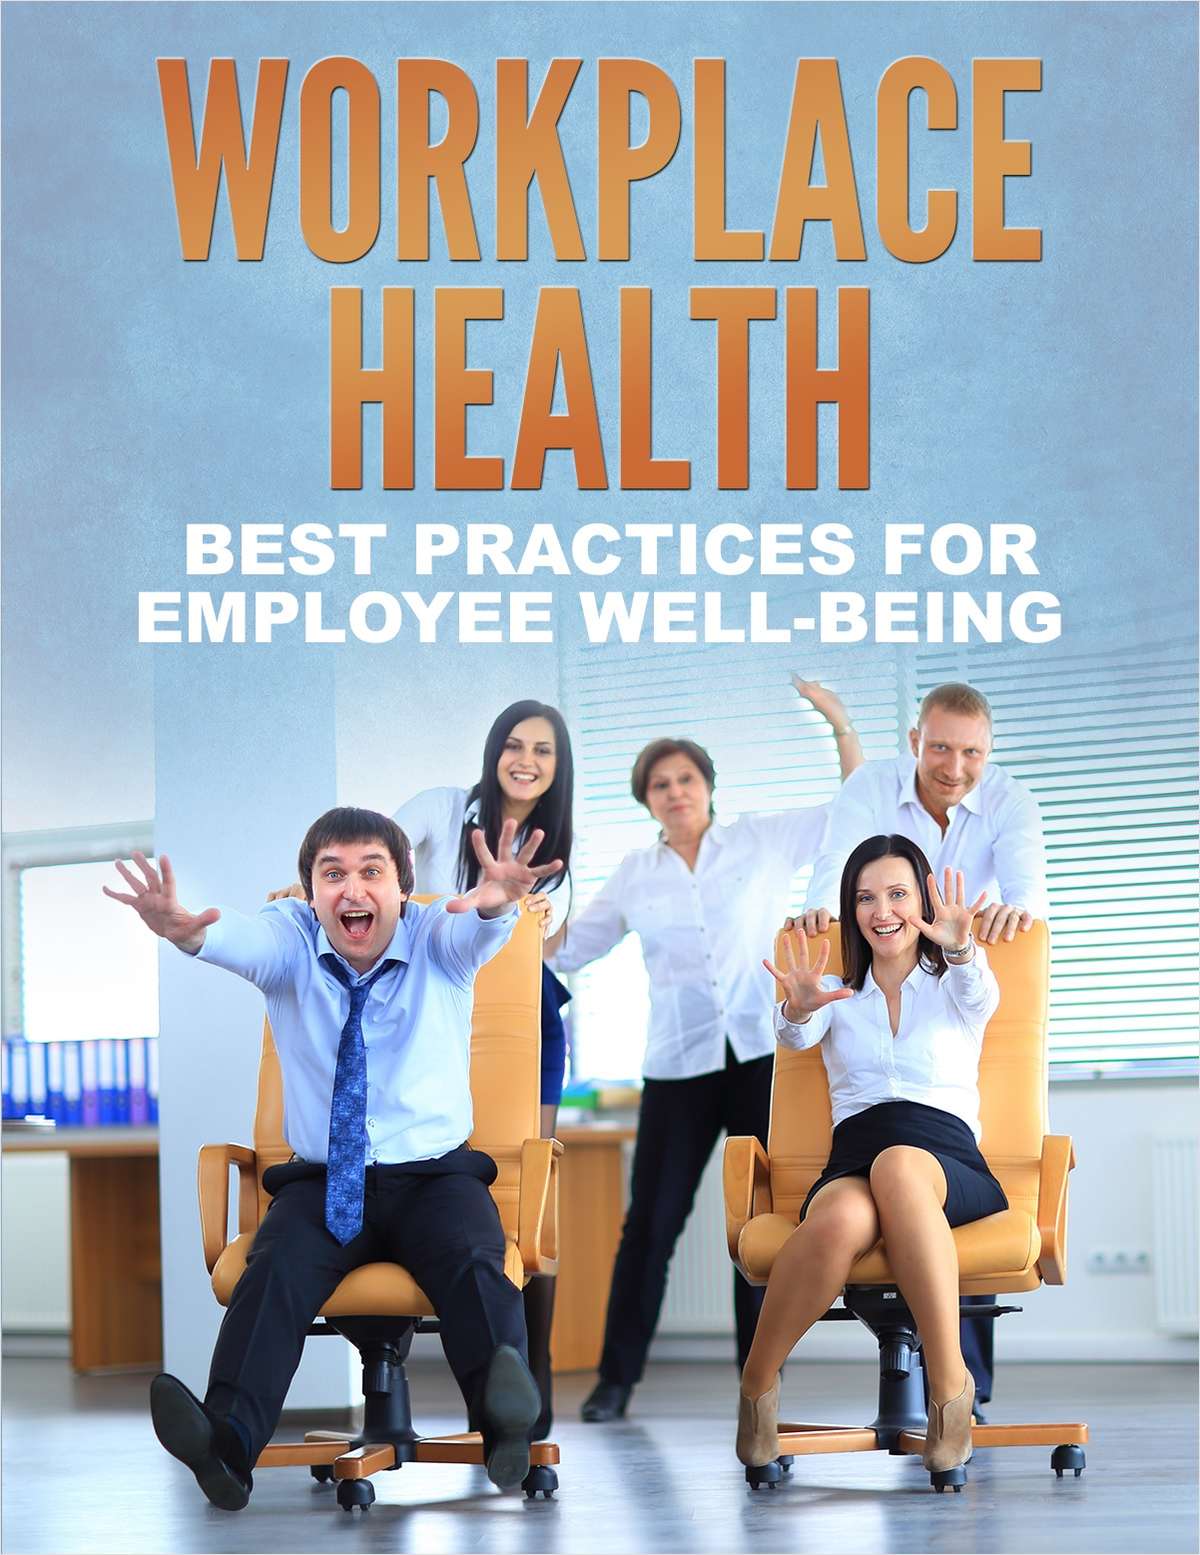 Workplace Health - Best Practices for Employee Well-Being